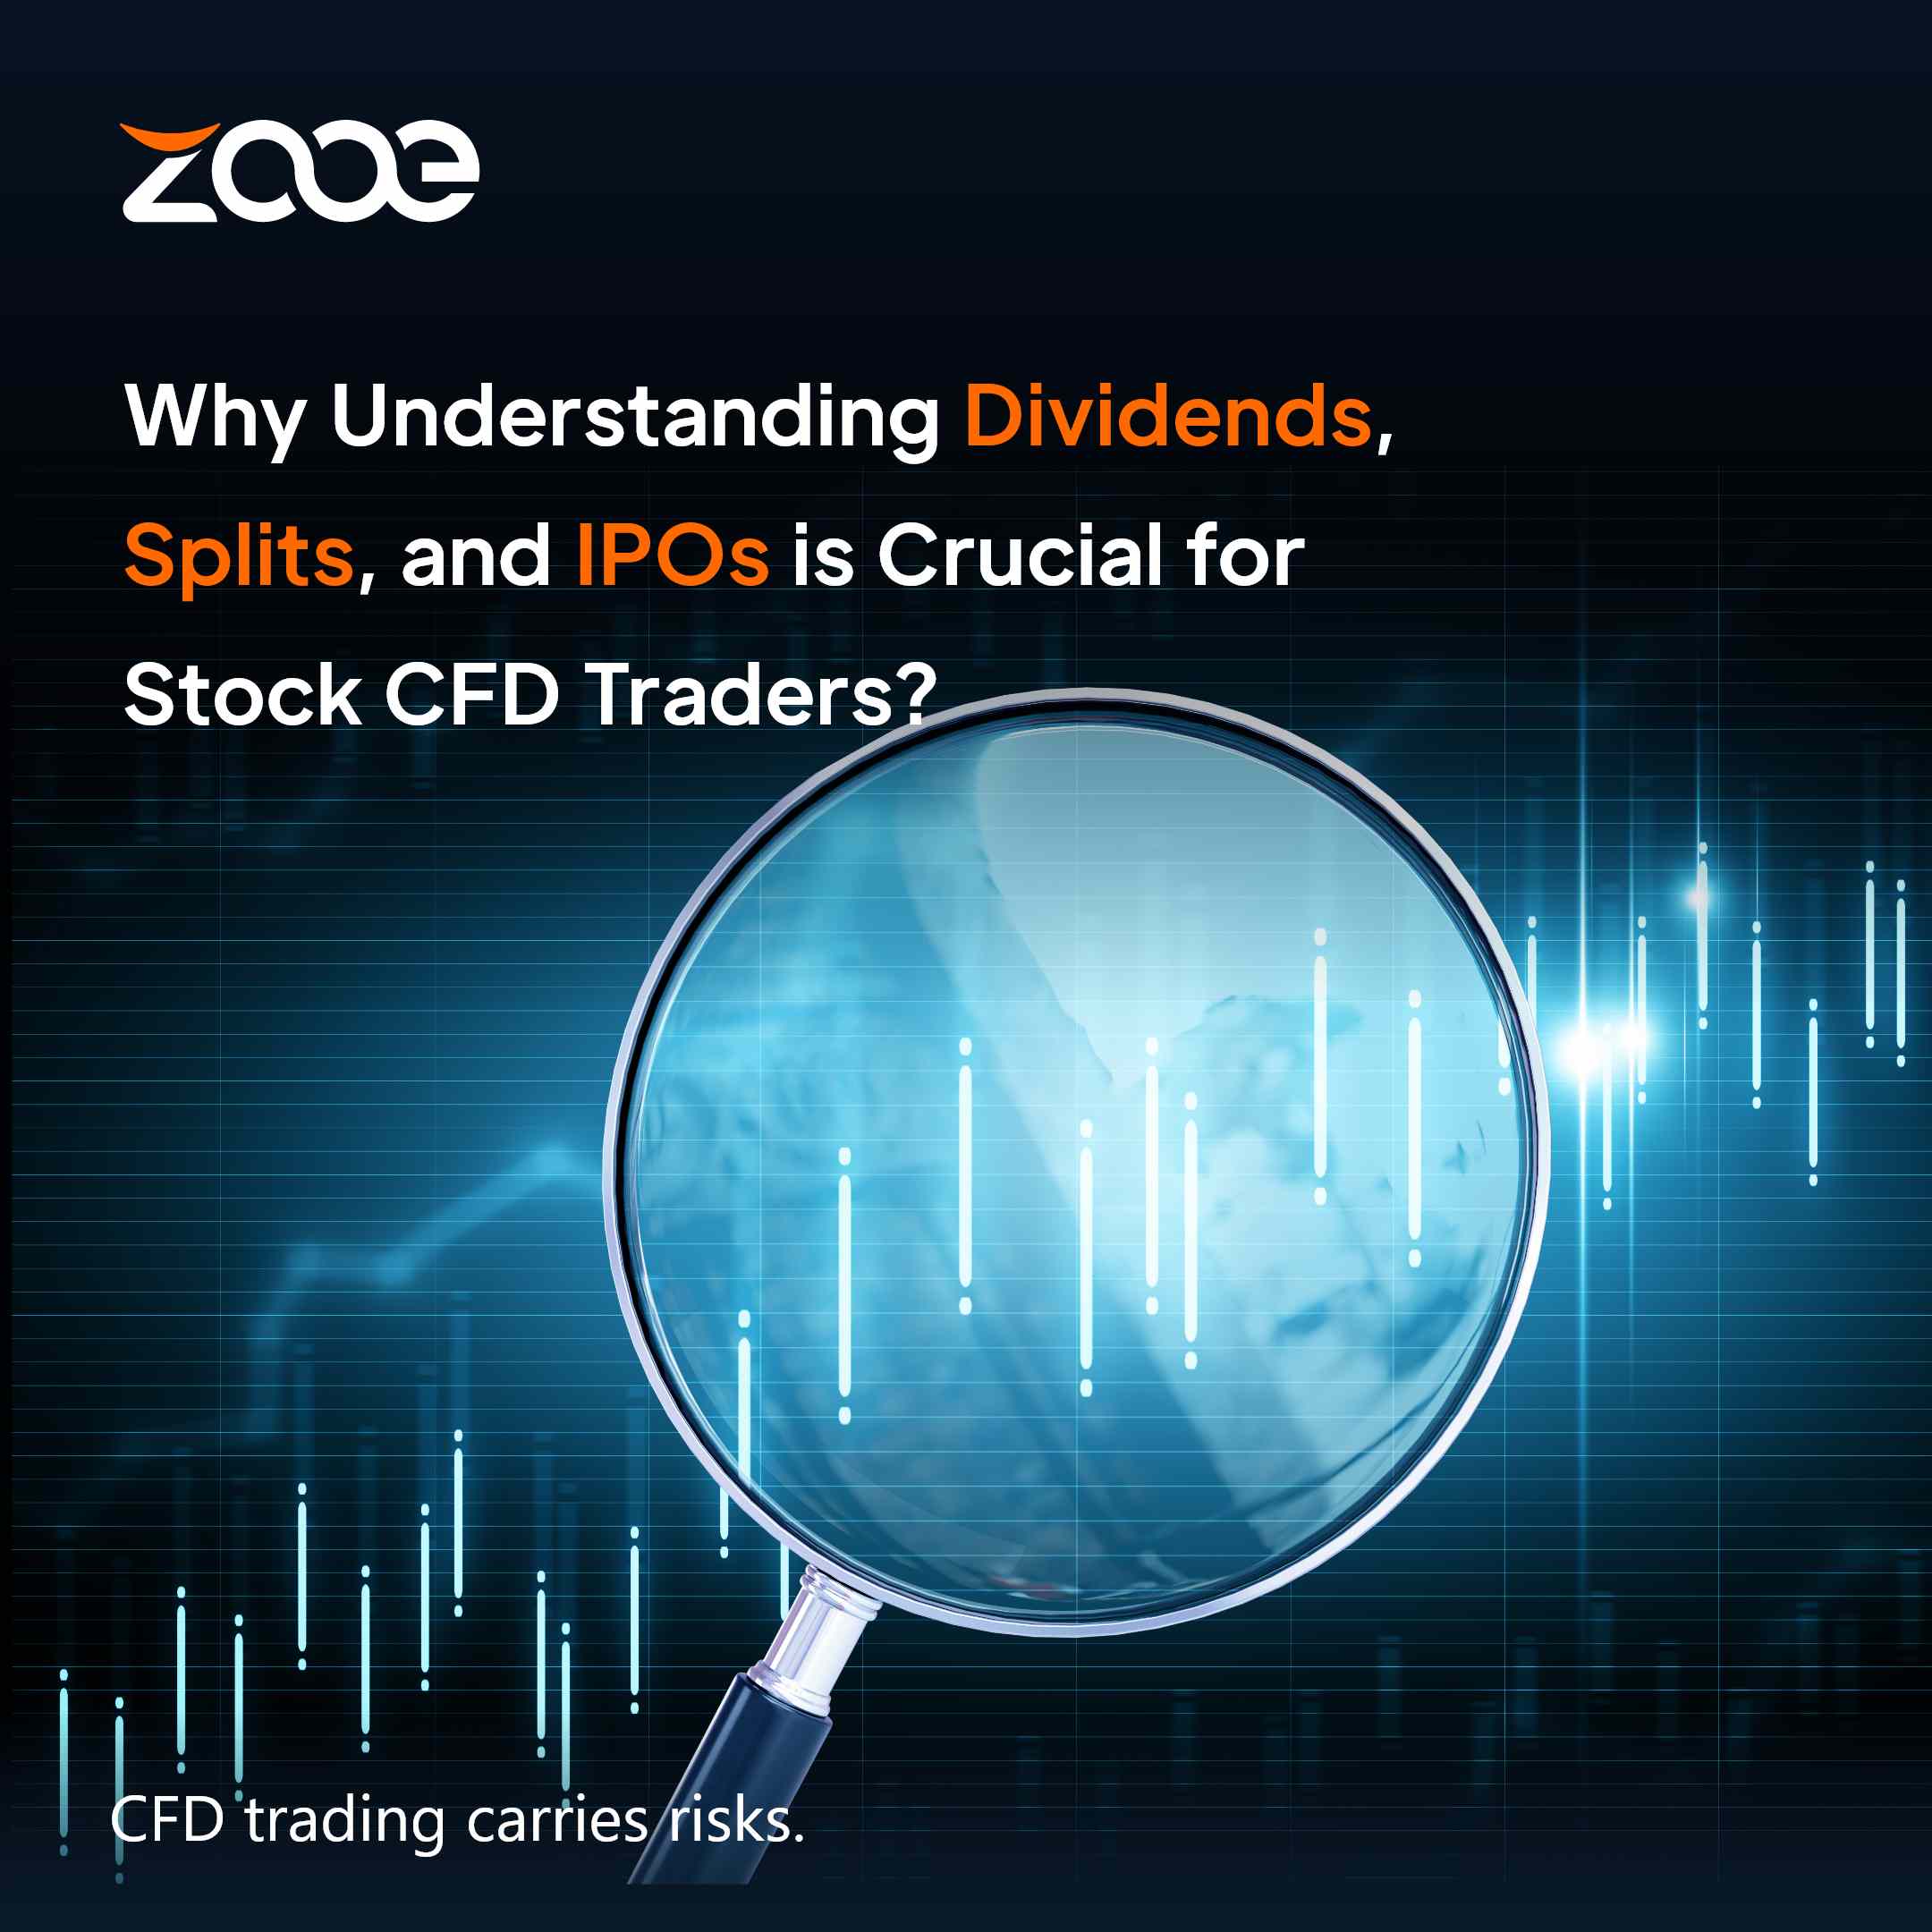 ZOOE Explains Key Stock Market Concepts: Dividends, Splits, and IPOs